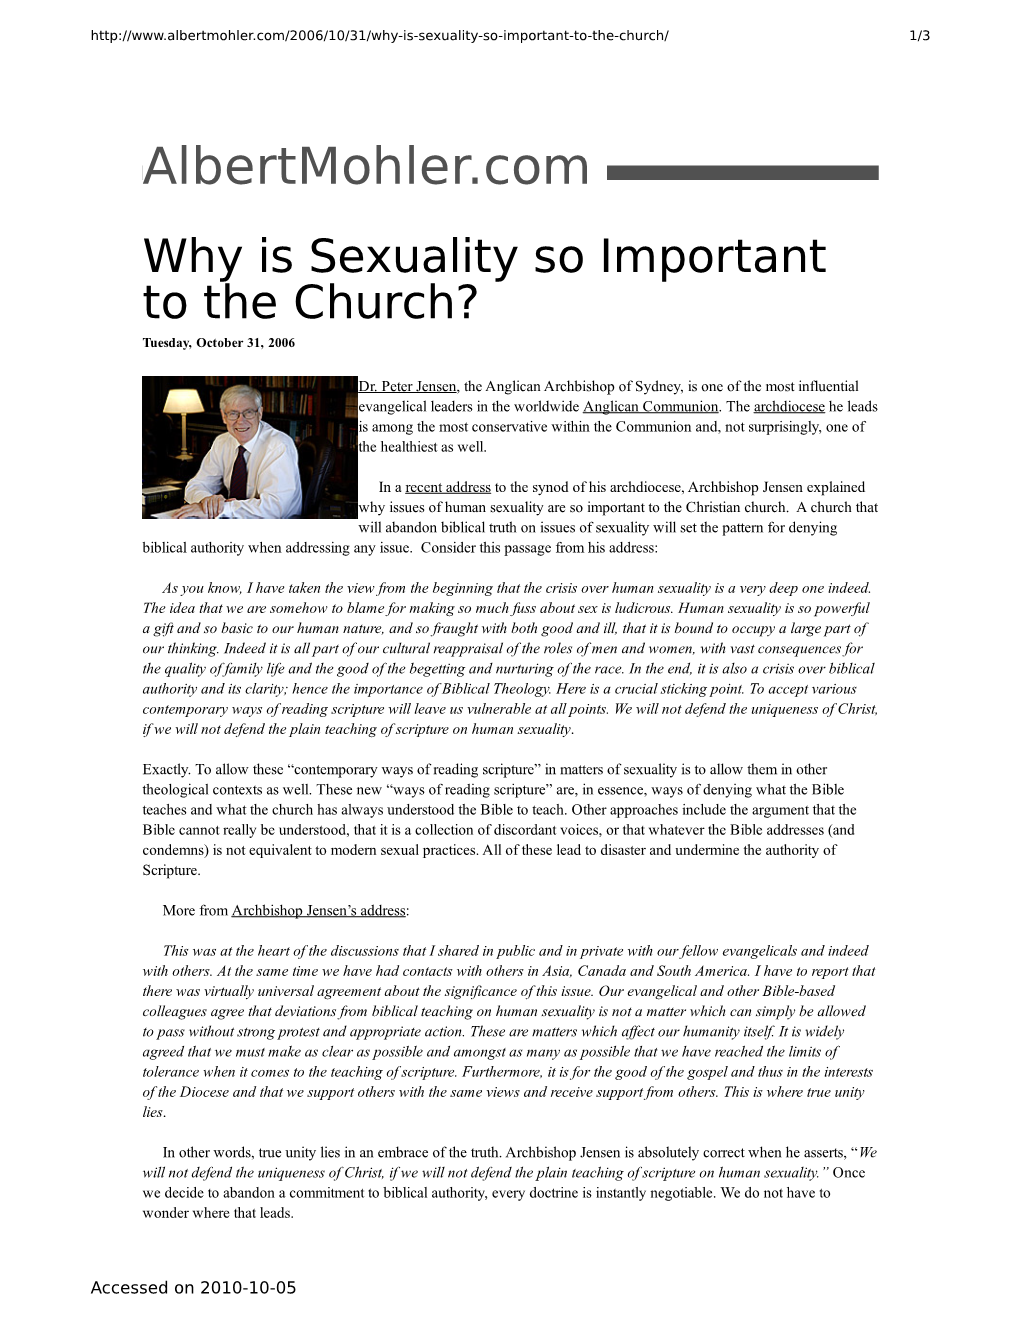 Albertmohler.Com – Why Is Sexuality So Important to the Church?